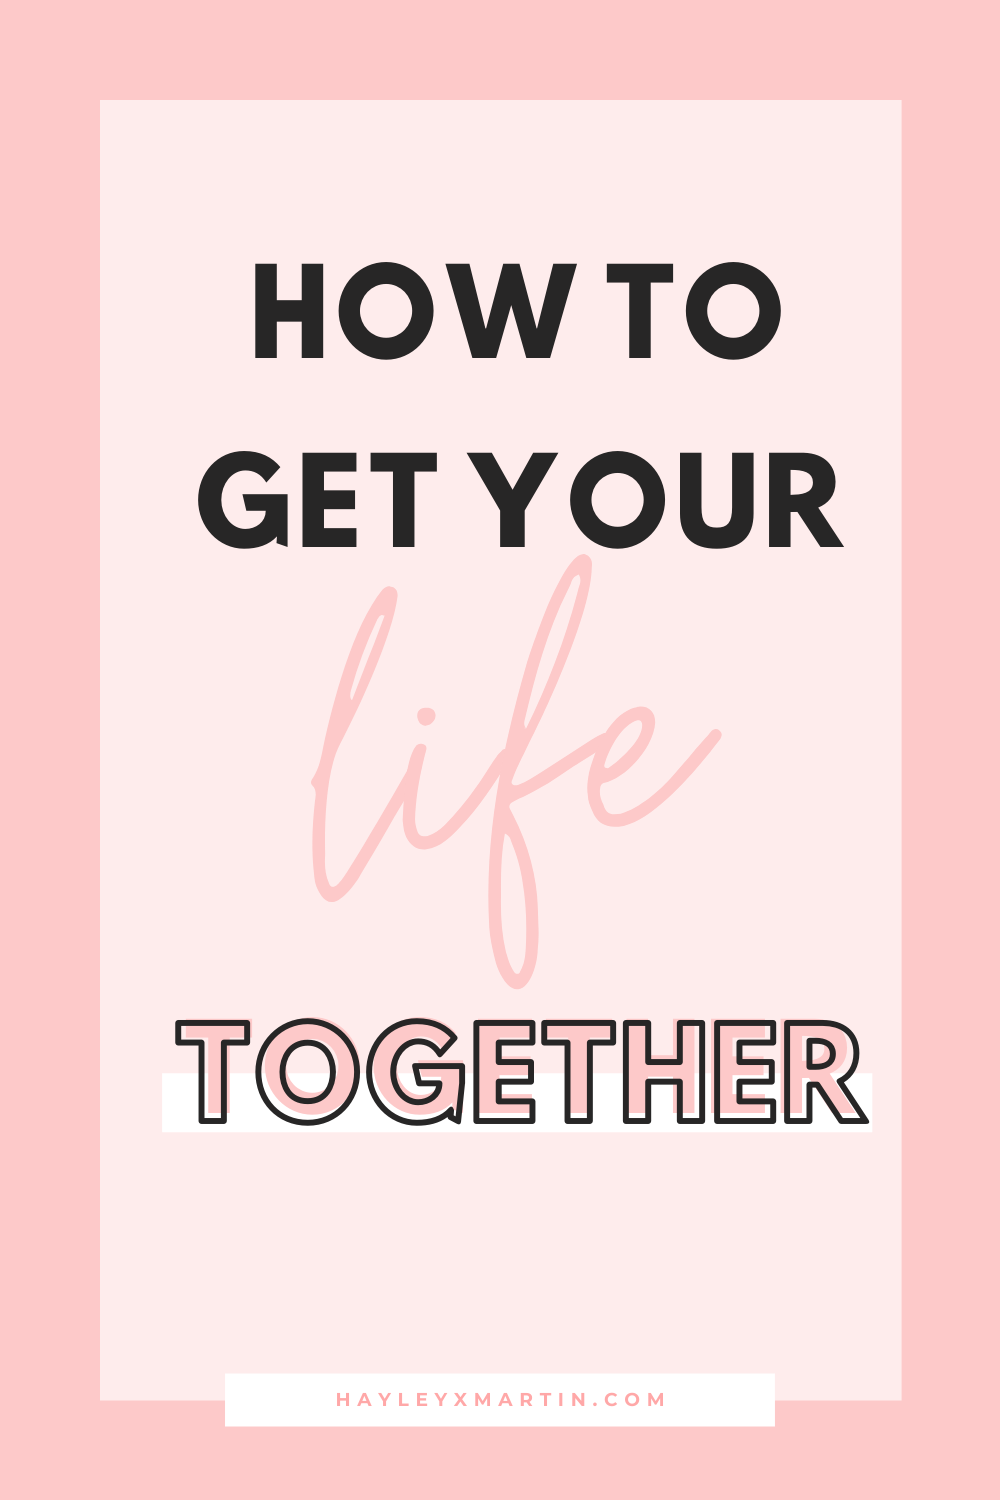 HOW TO GET YOUR LIFE TOGETHER | HAYLEYXMARTIN